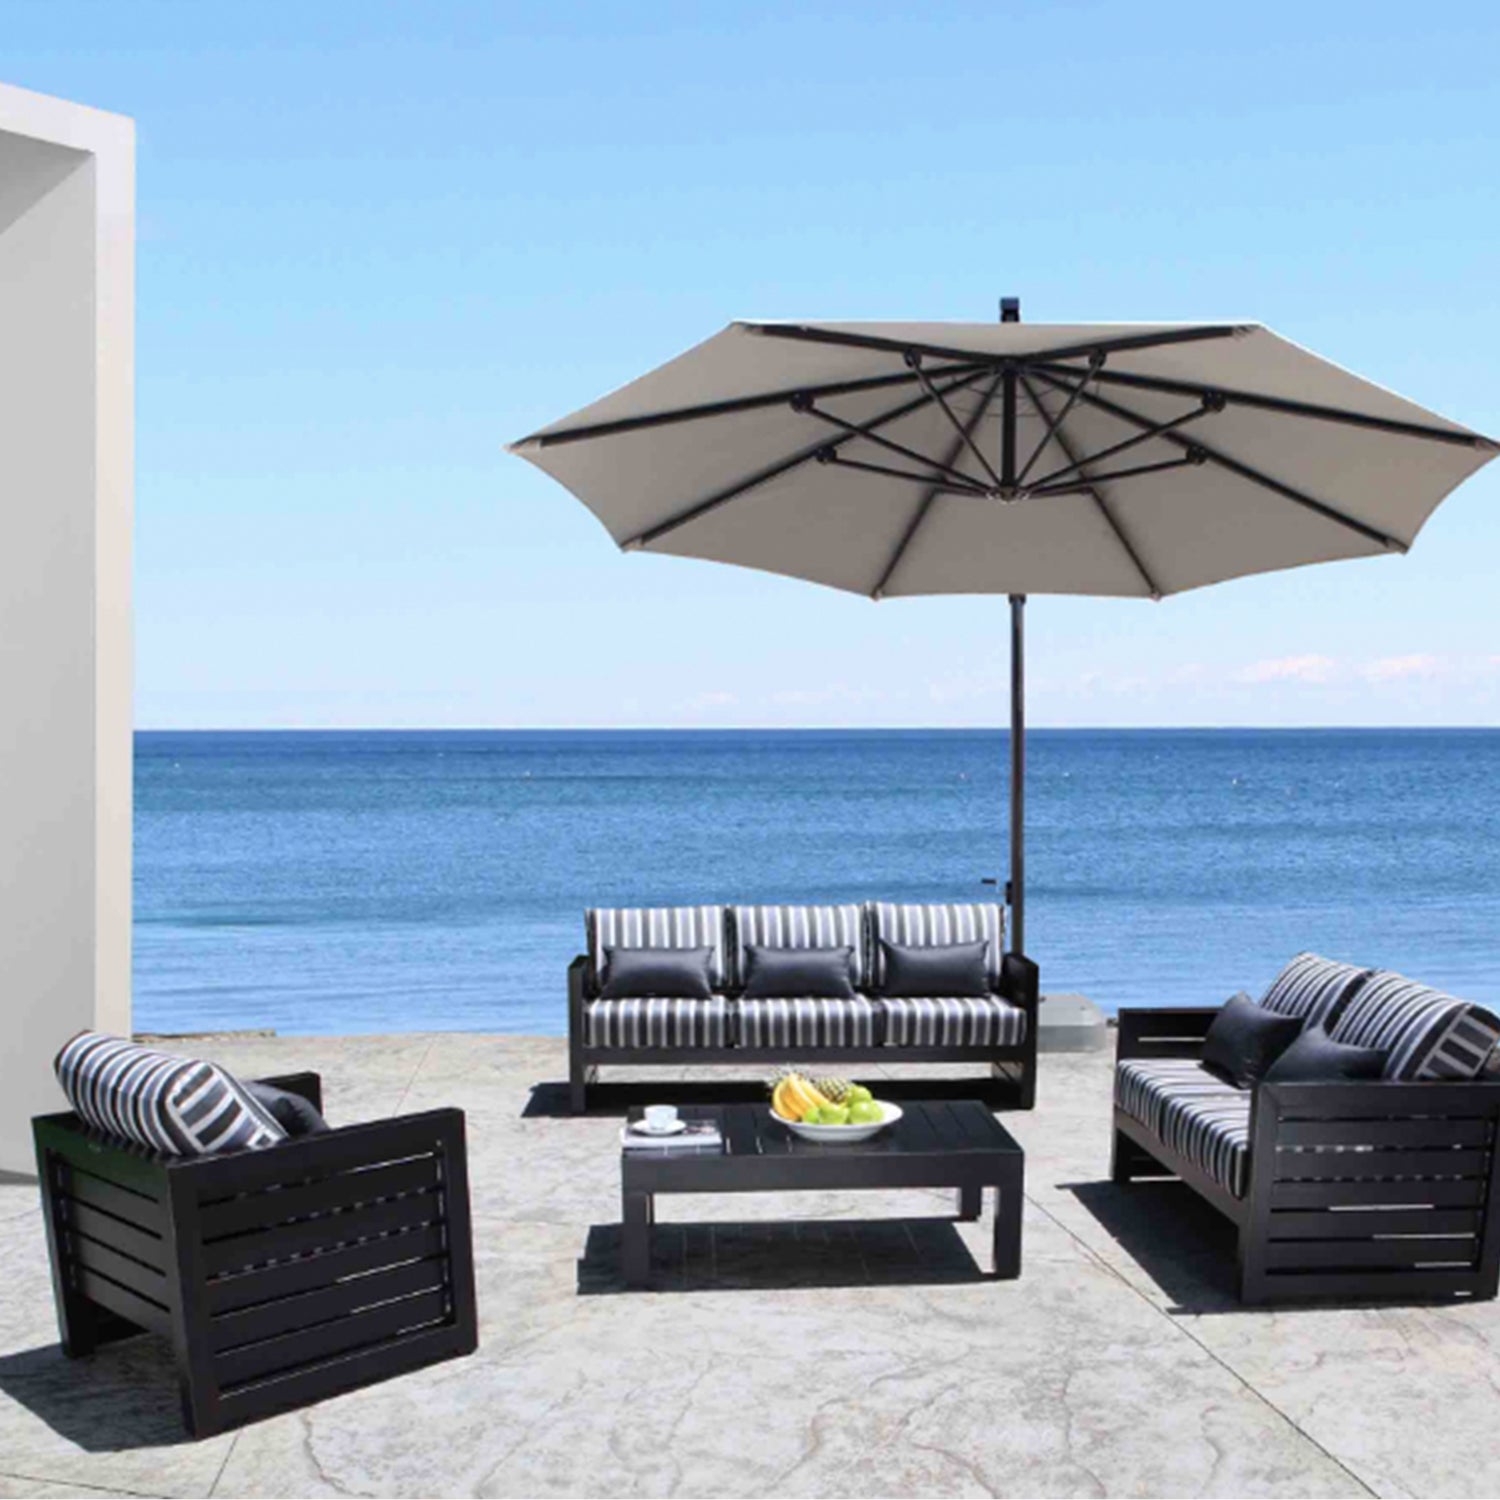 Patio furniture set with sofa, 2 chairs, and an cantilever umbrella